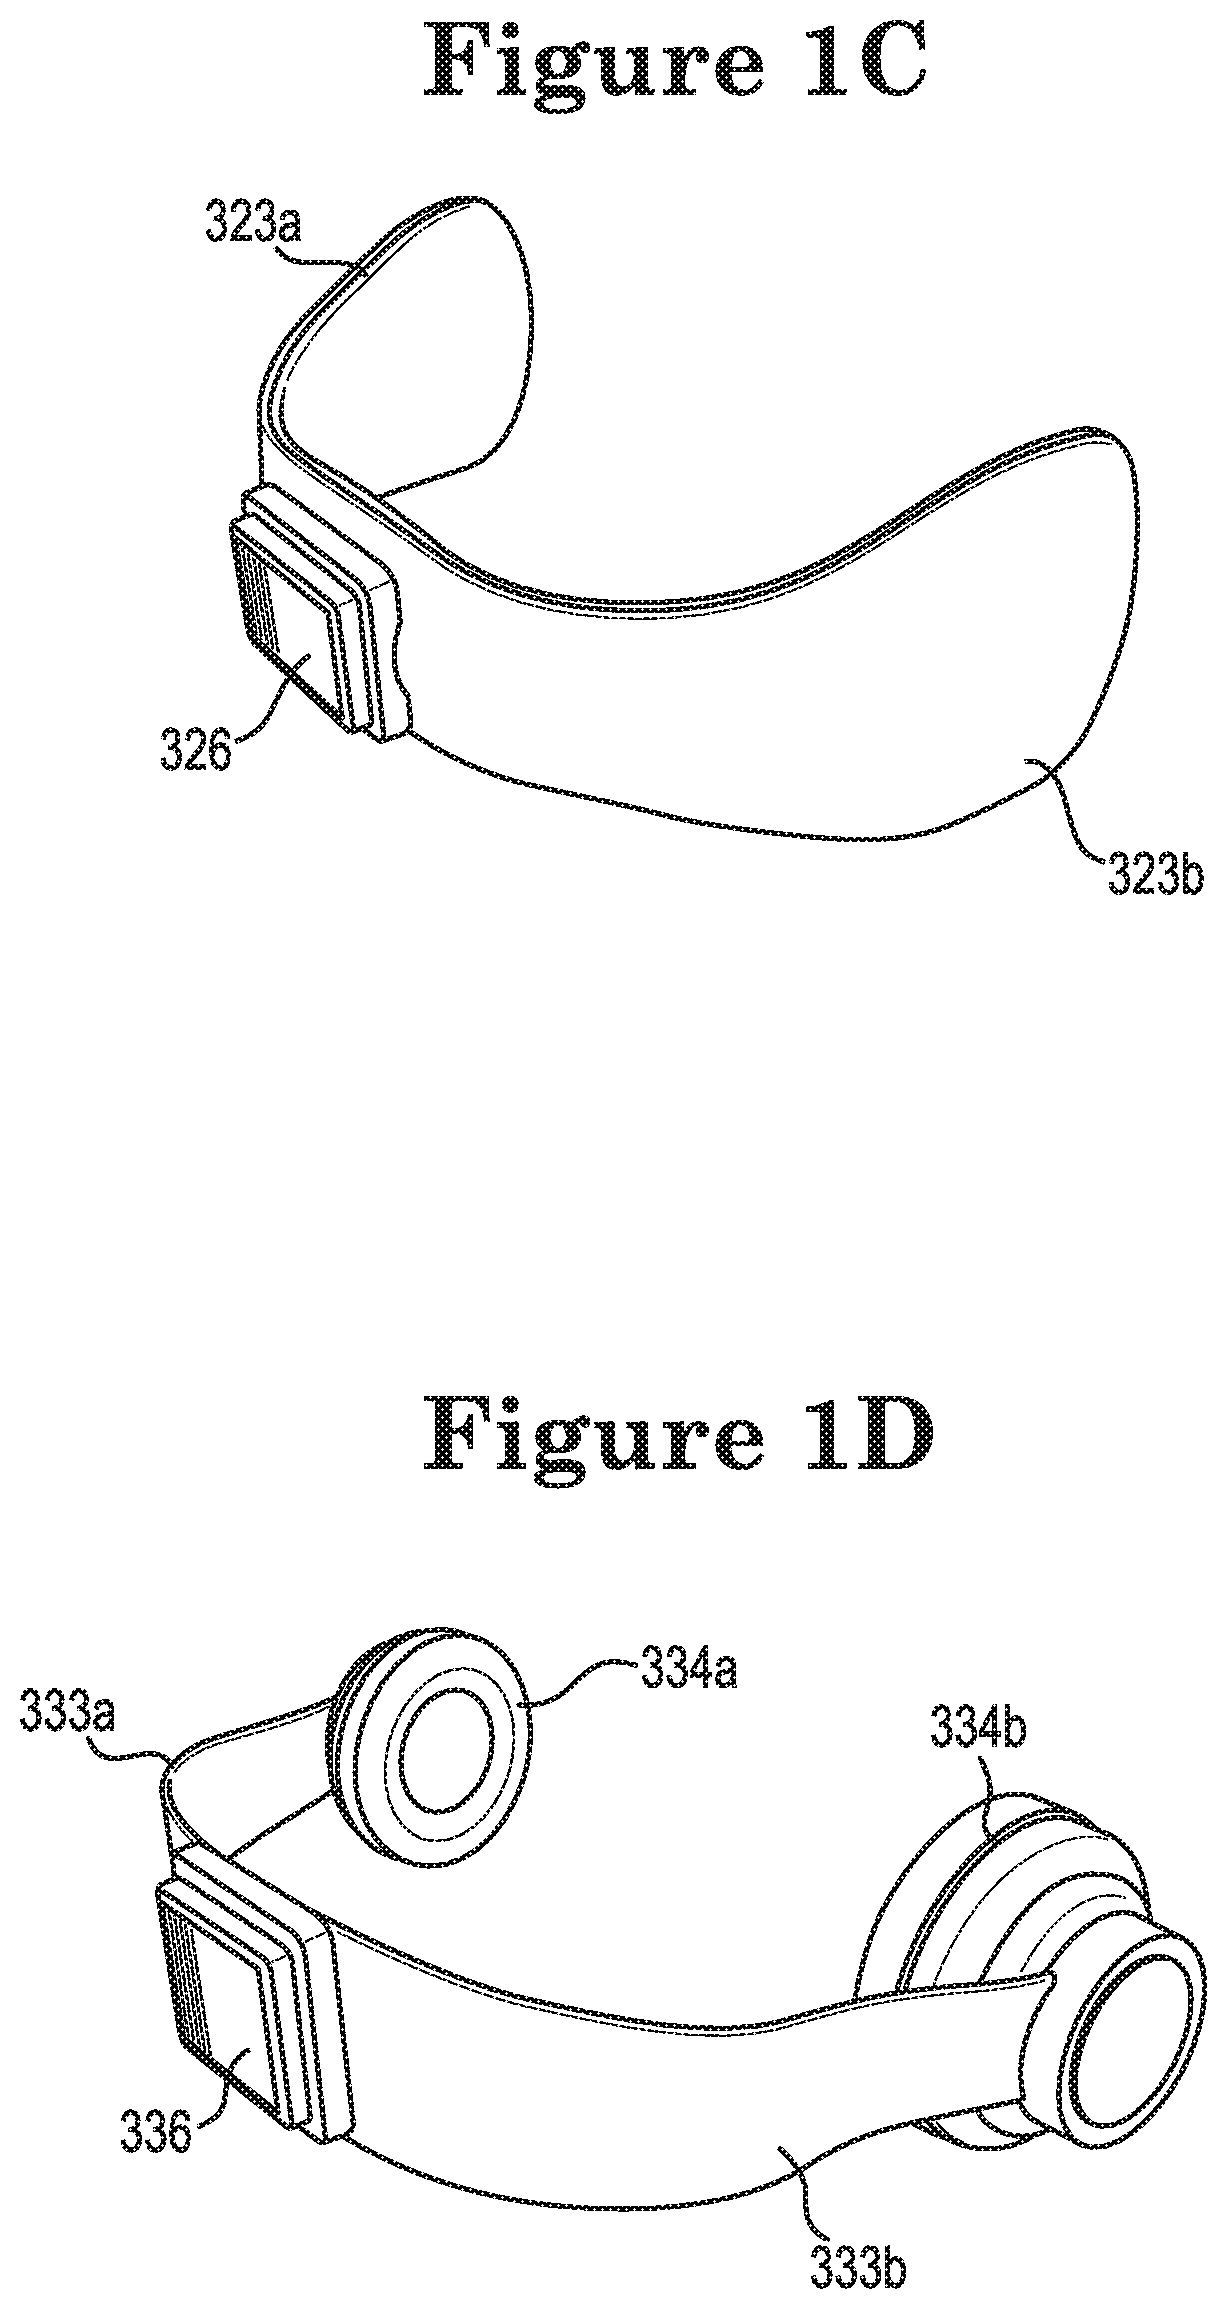 Sensory stimulation or monitoring apparatus for the back of neck